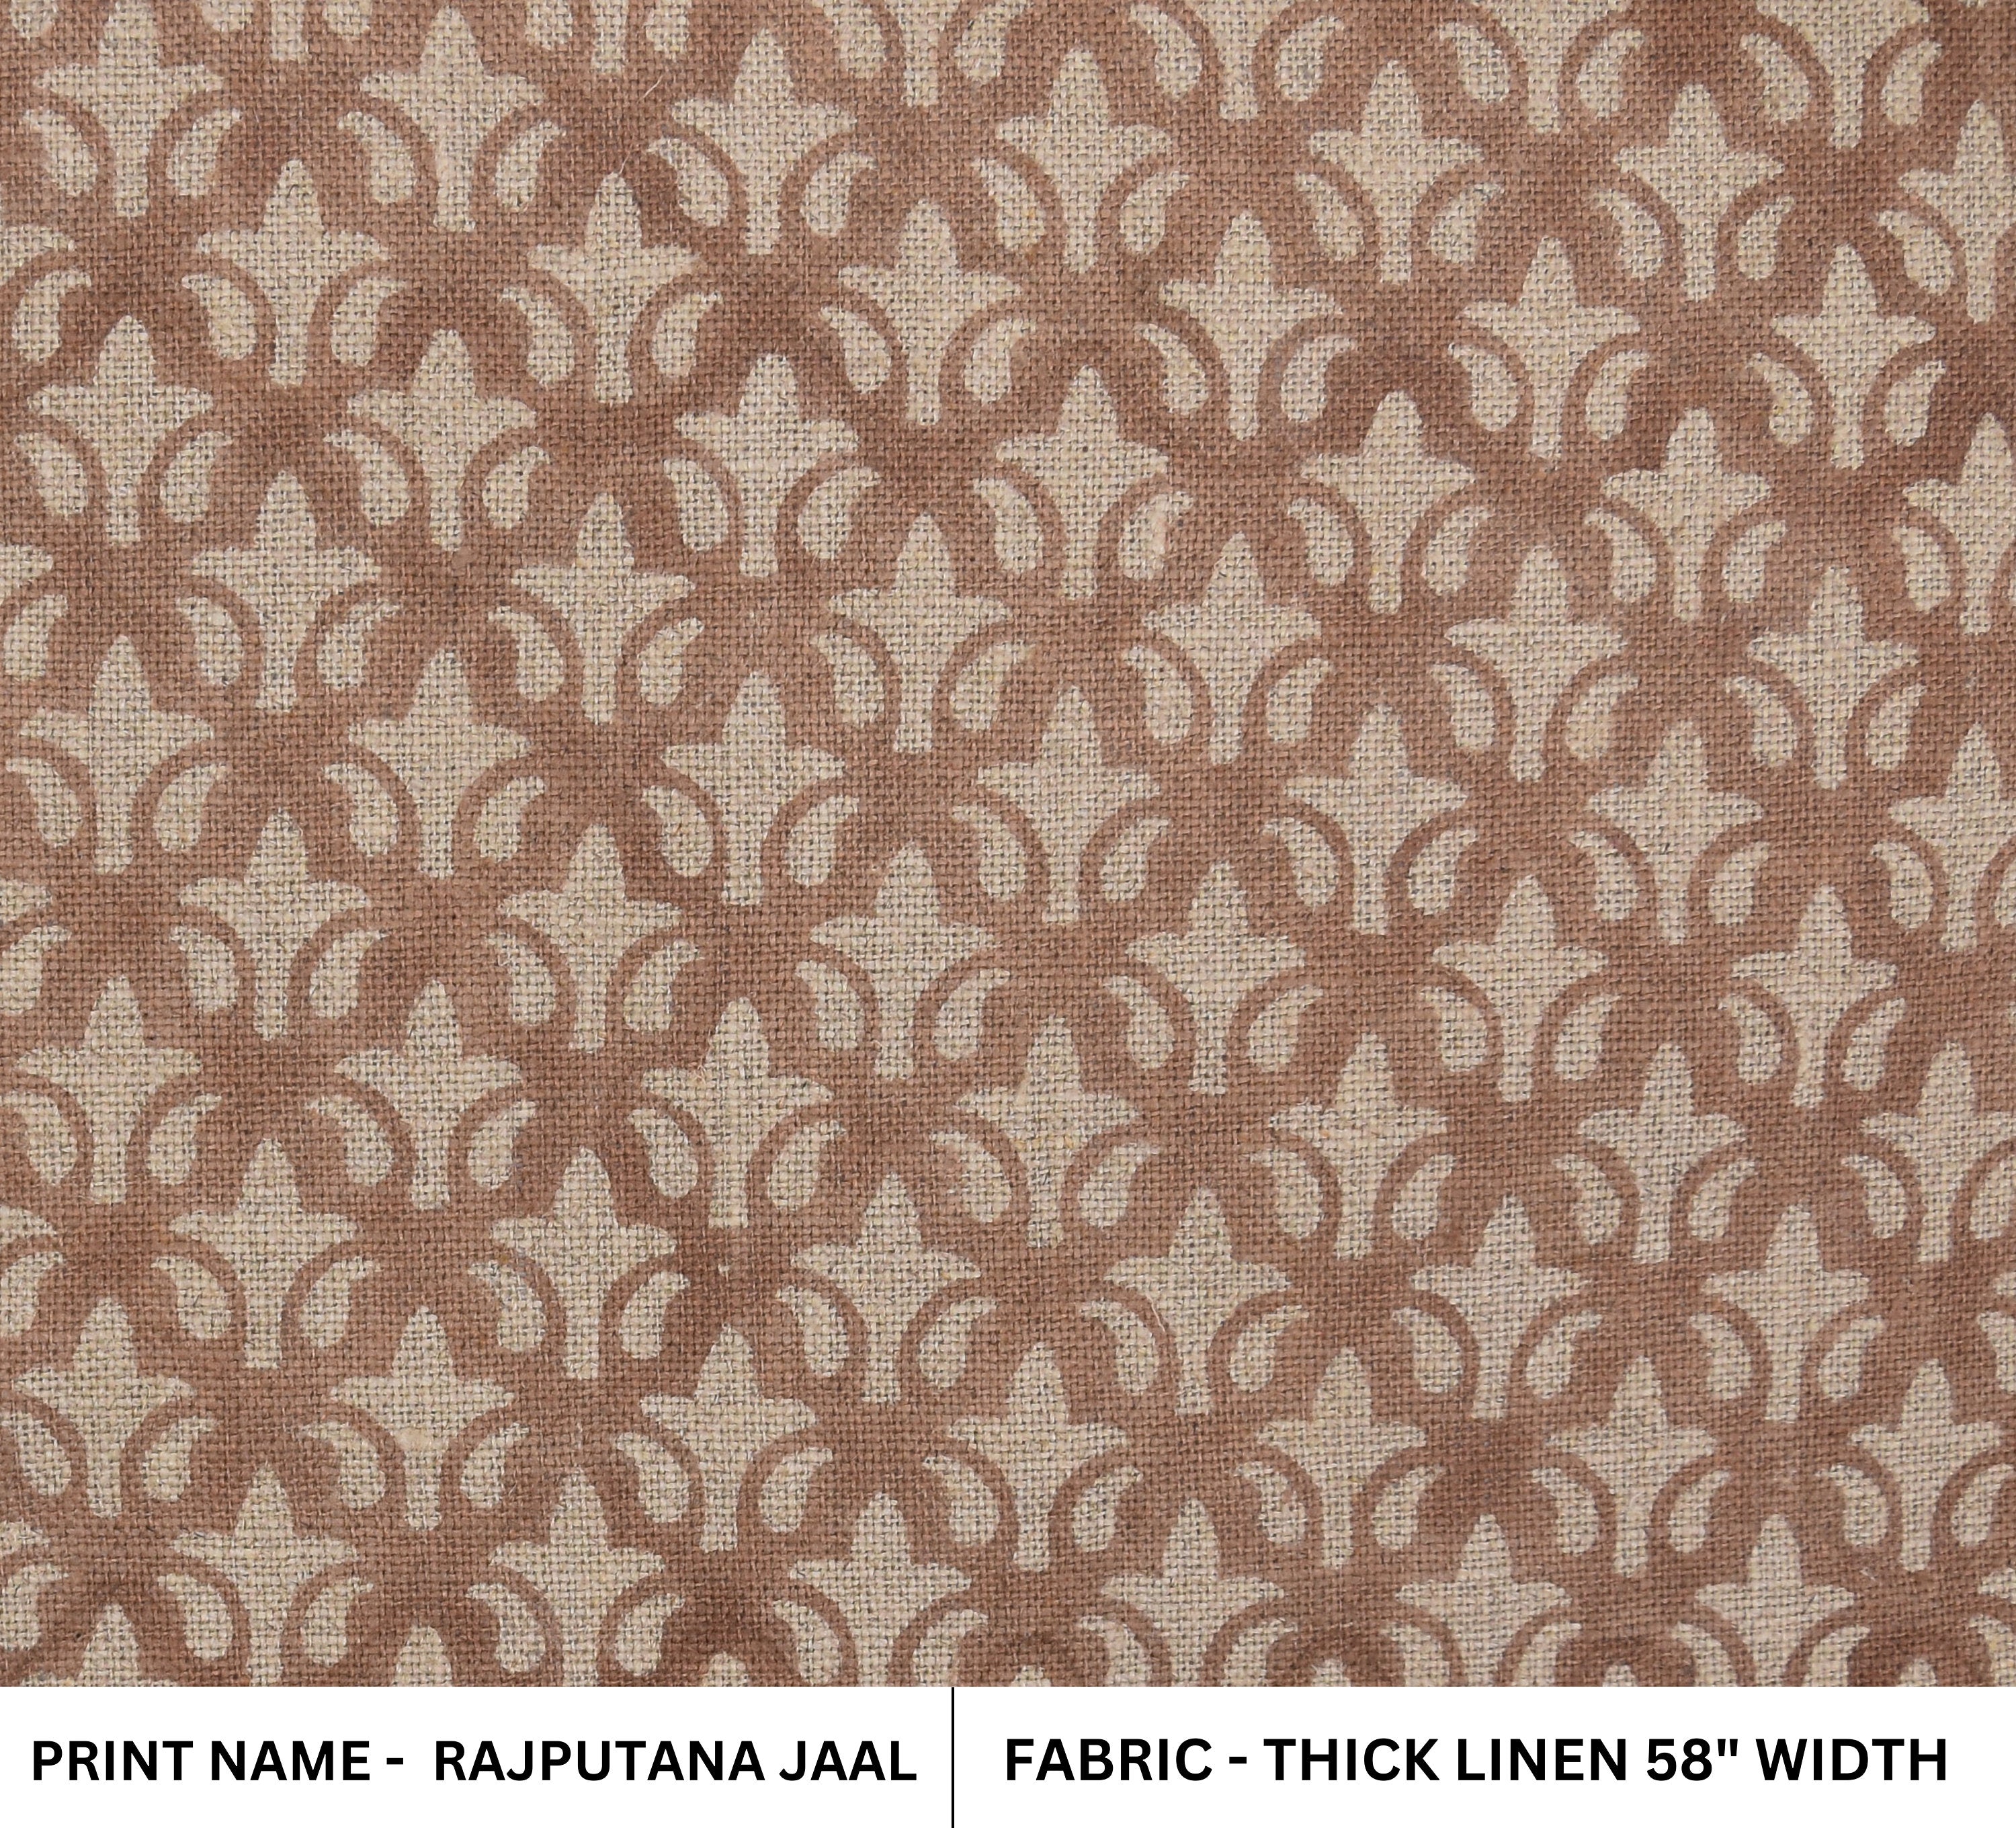 Block Print Thick Linen 58" Wide, Indian Fabric, Pillow Cover, Rust Floral Printed Fabric, Table Cloth - RAJPUTANA JAAL